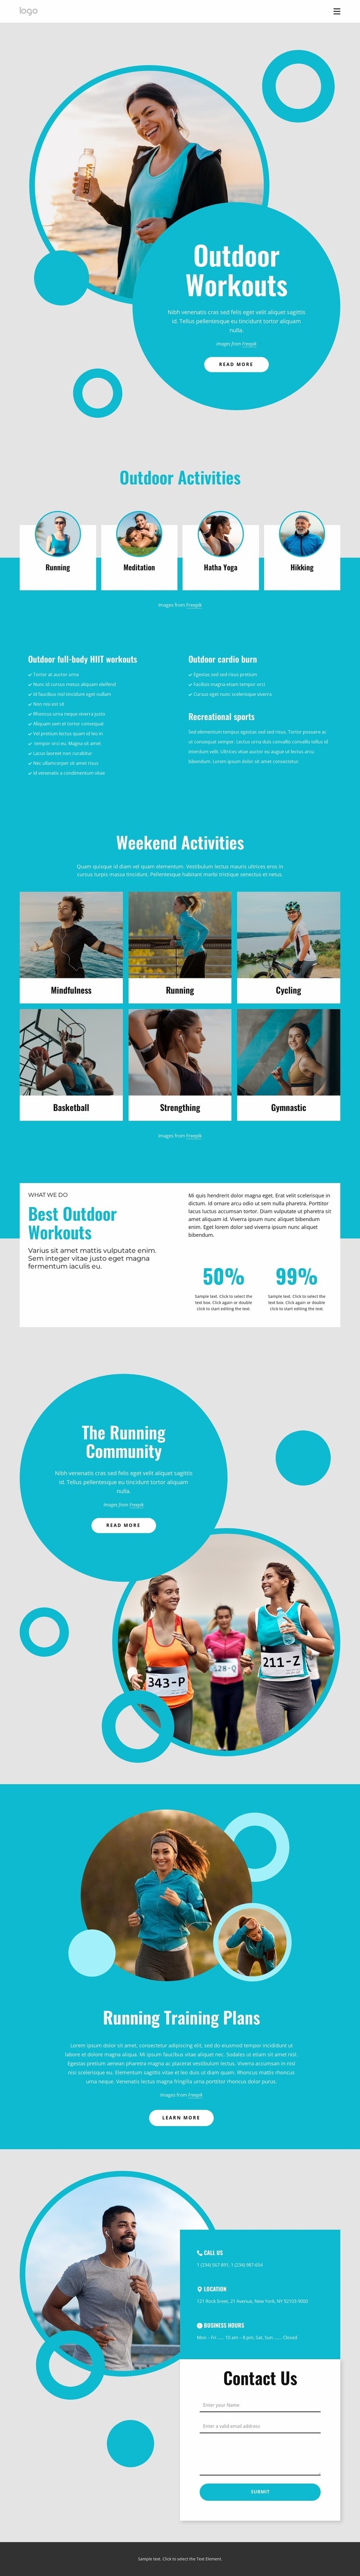 Total-body outdoor workouts Web Page Design